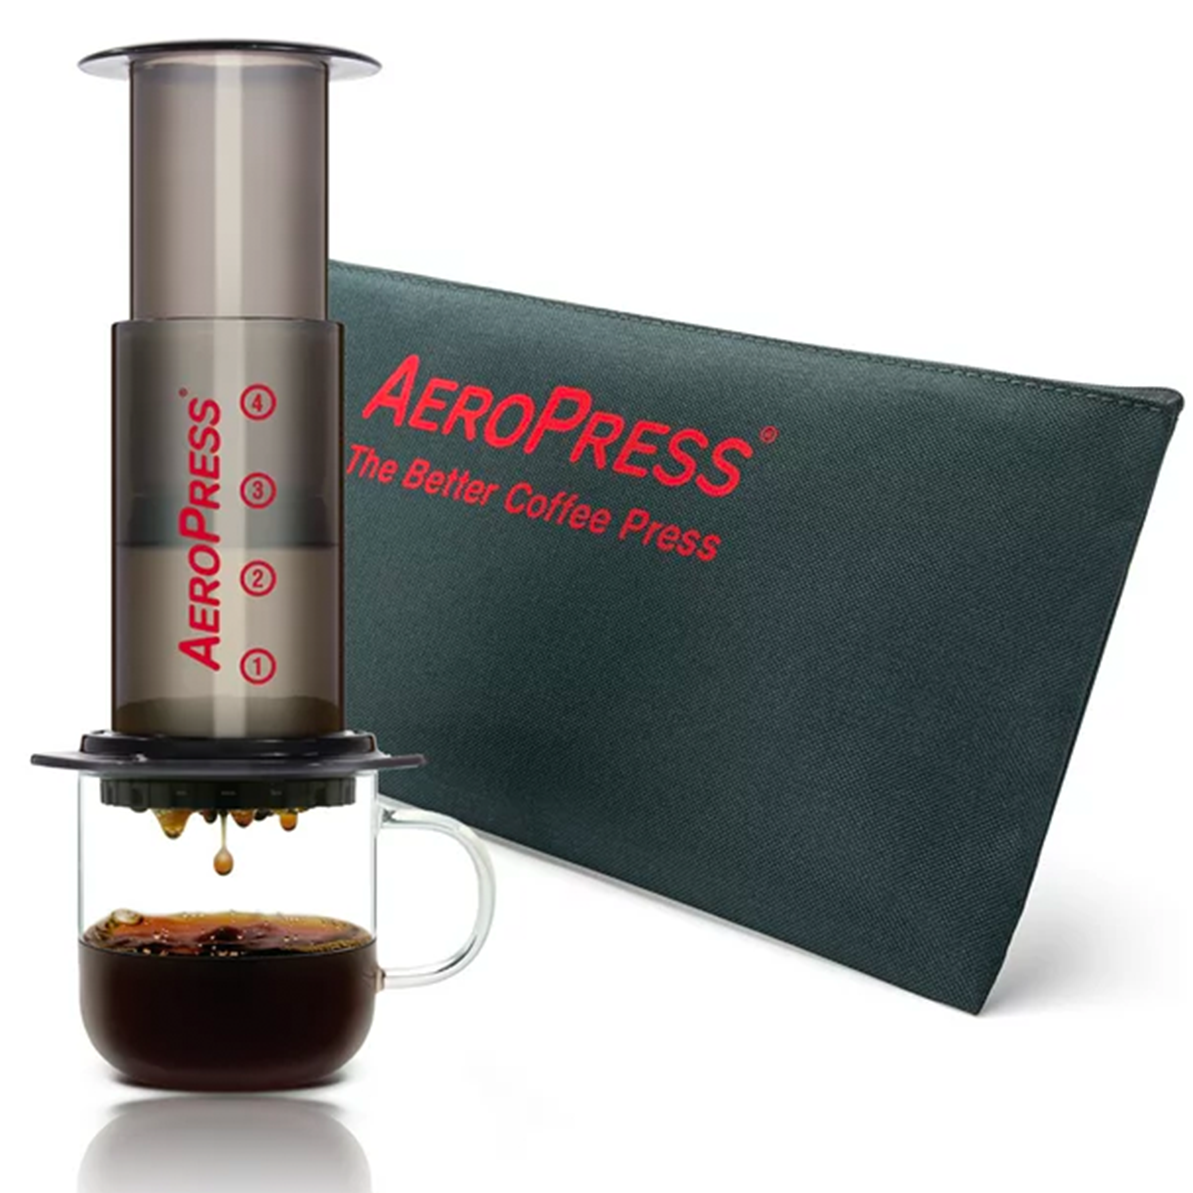 https://cdn.shopify.com/s/files/1/0550/4119/6267/products/Aeropresswtote3_1445x.png?v=1675461107